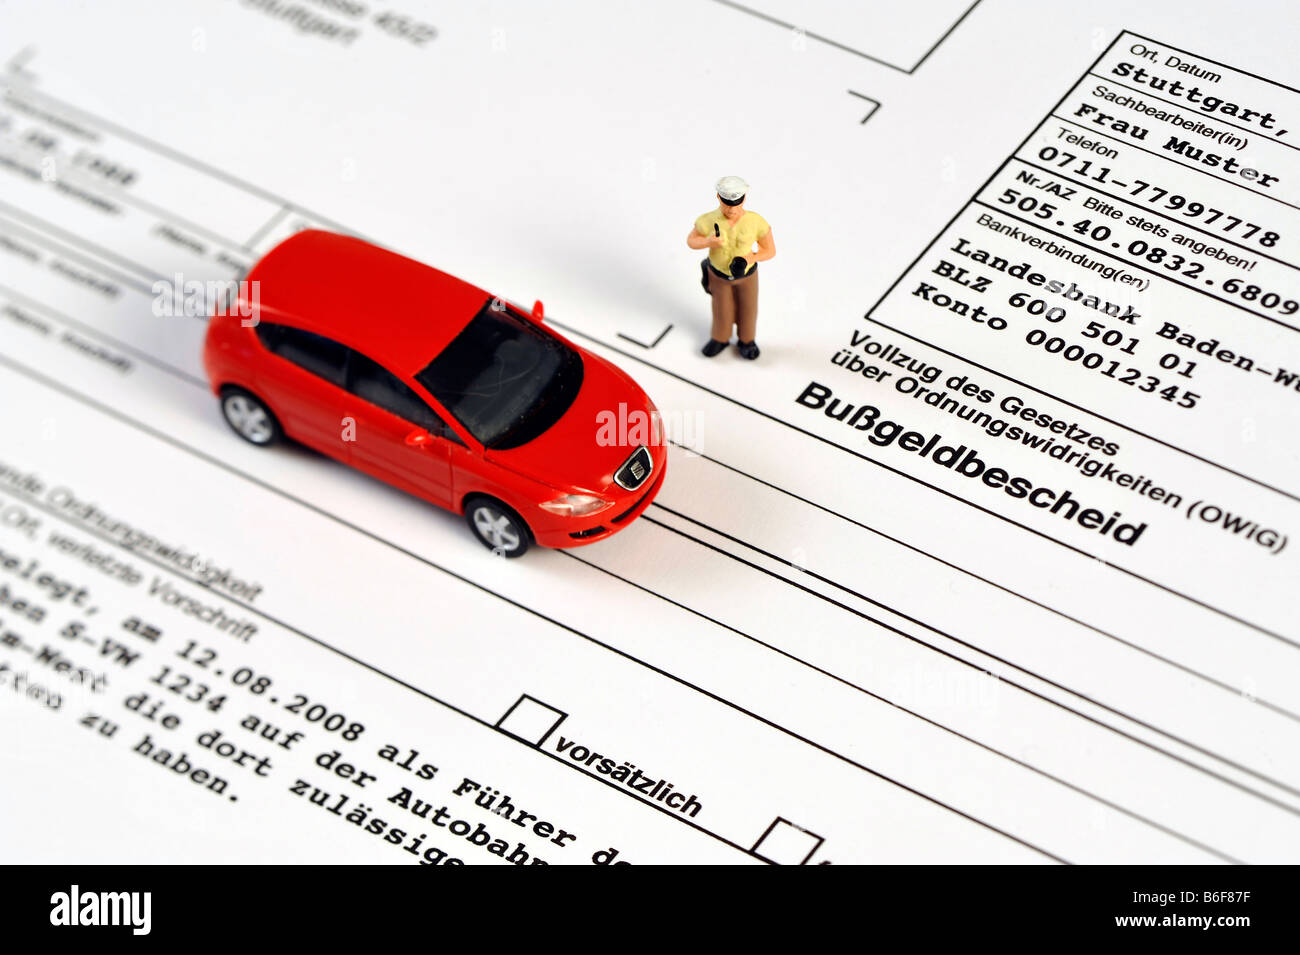 Policeman and Peugeot car as miniature figures on a traffic violation ticket Stock Photo